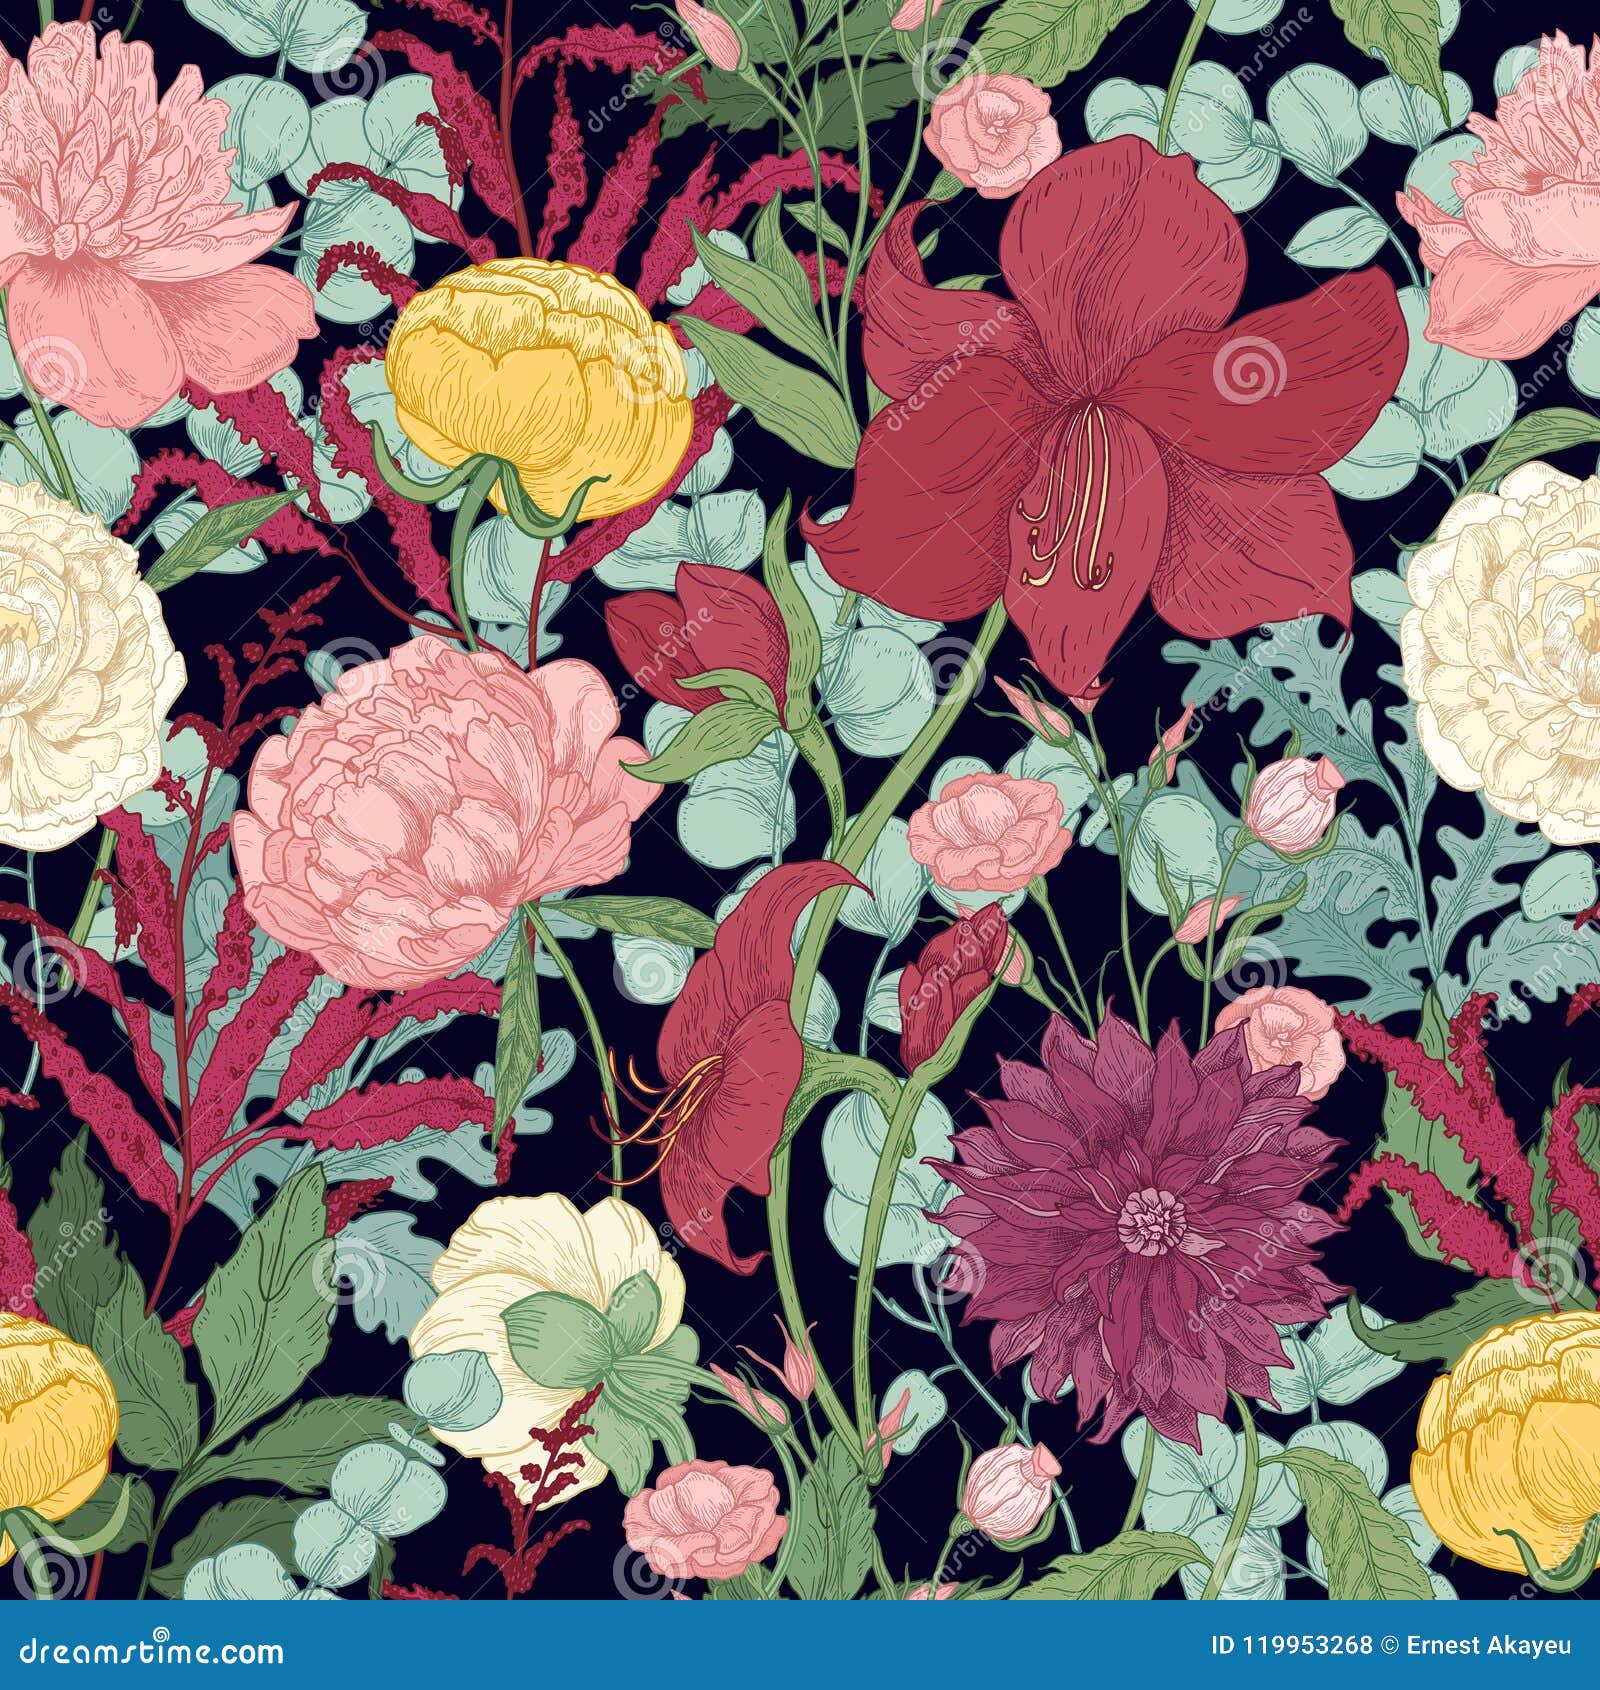 botanical seamless pattern with gorgeous garden and wild floristic flowers and flowering herbs on black background